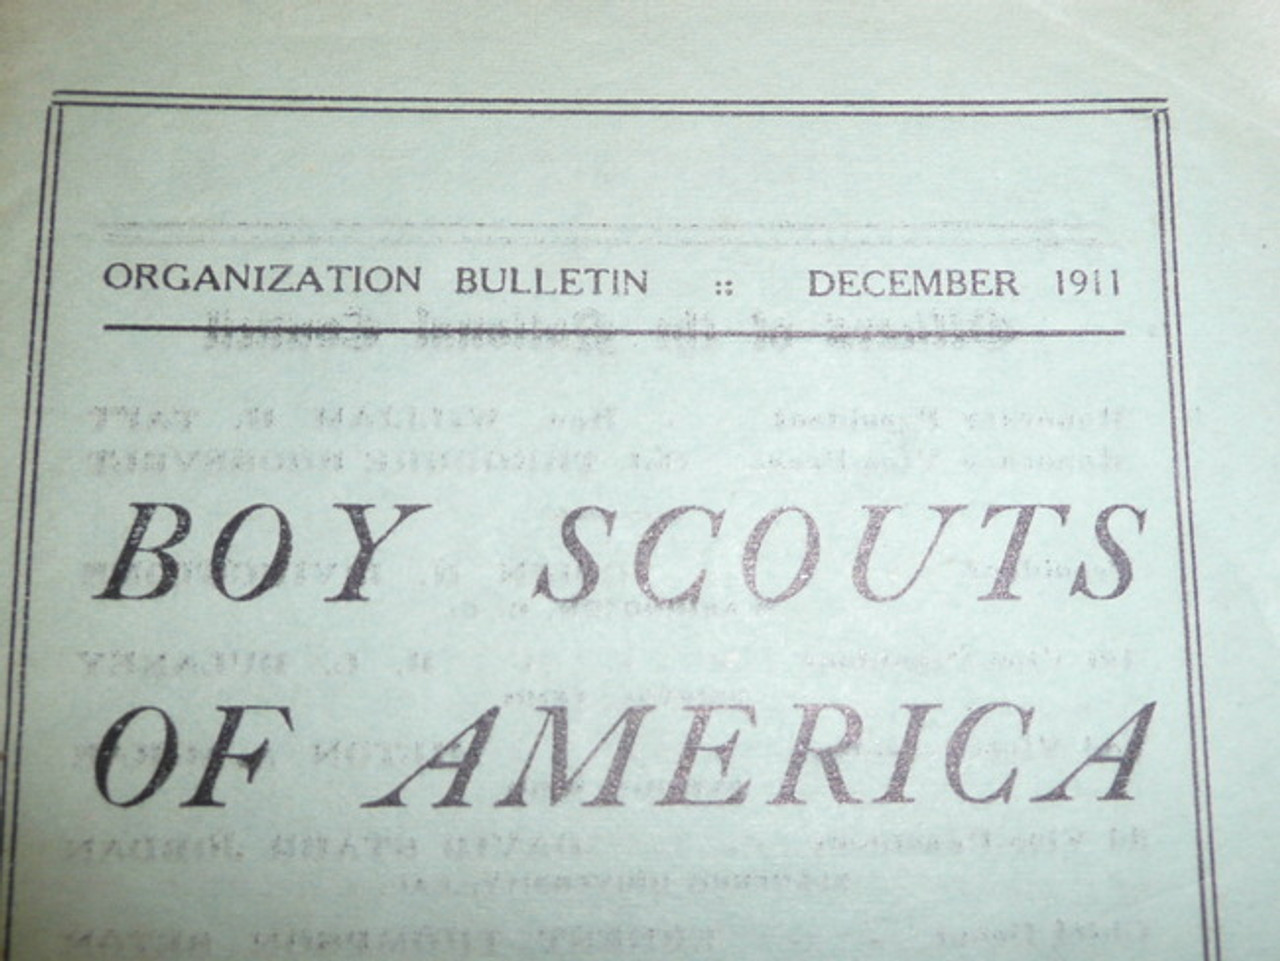 1911 Suggestions Regarding the Formation of Local Councils Patrols and Troops - Scout Officers and their Duties, Organizational Bulletin, Ultra Rare BSA Formation Booklet, 4 Bulletins in Set